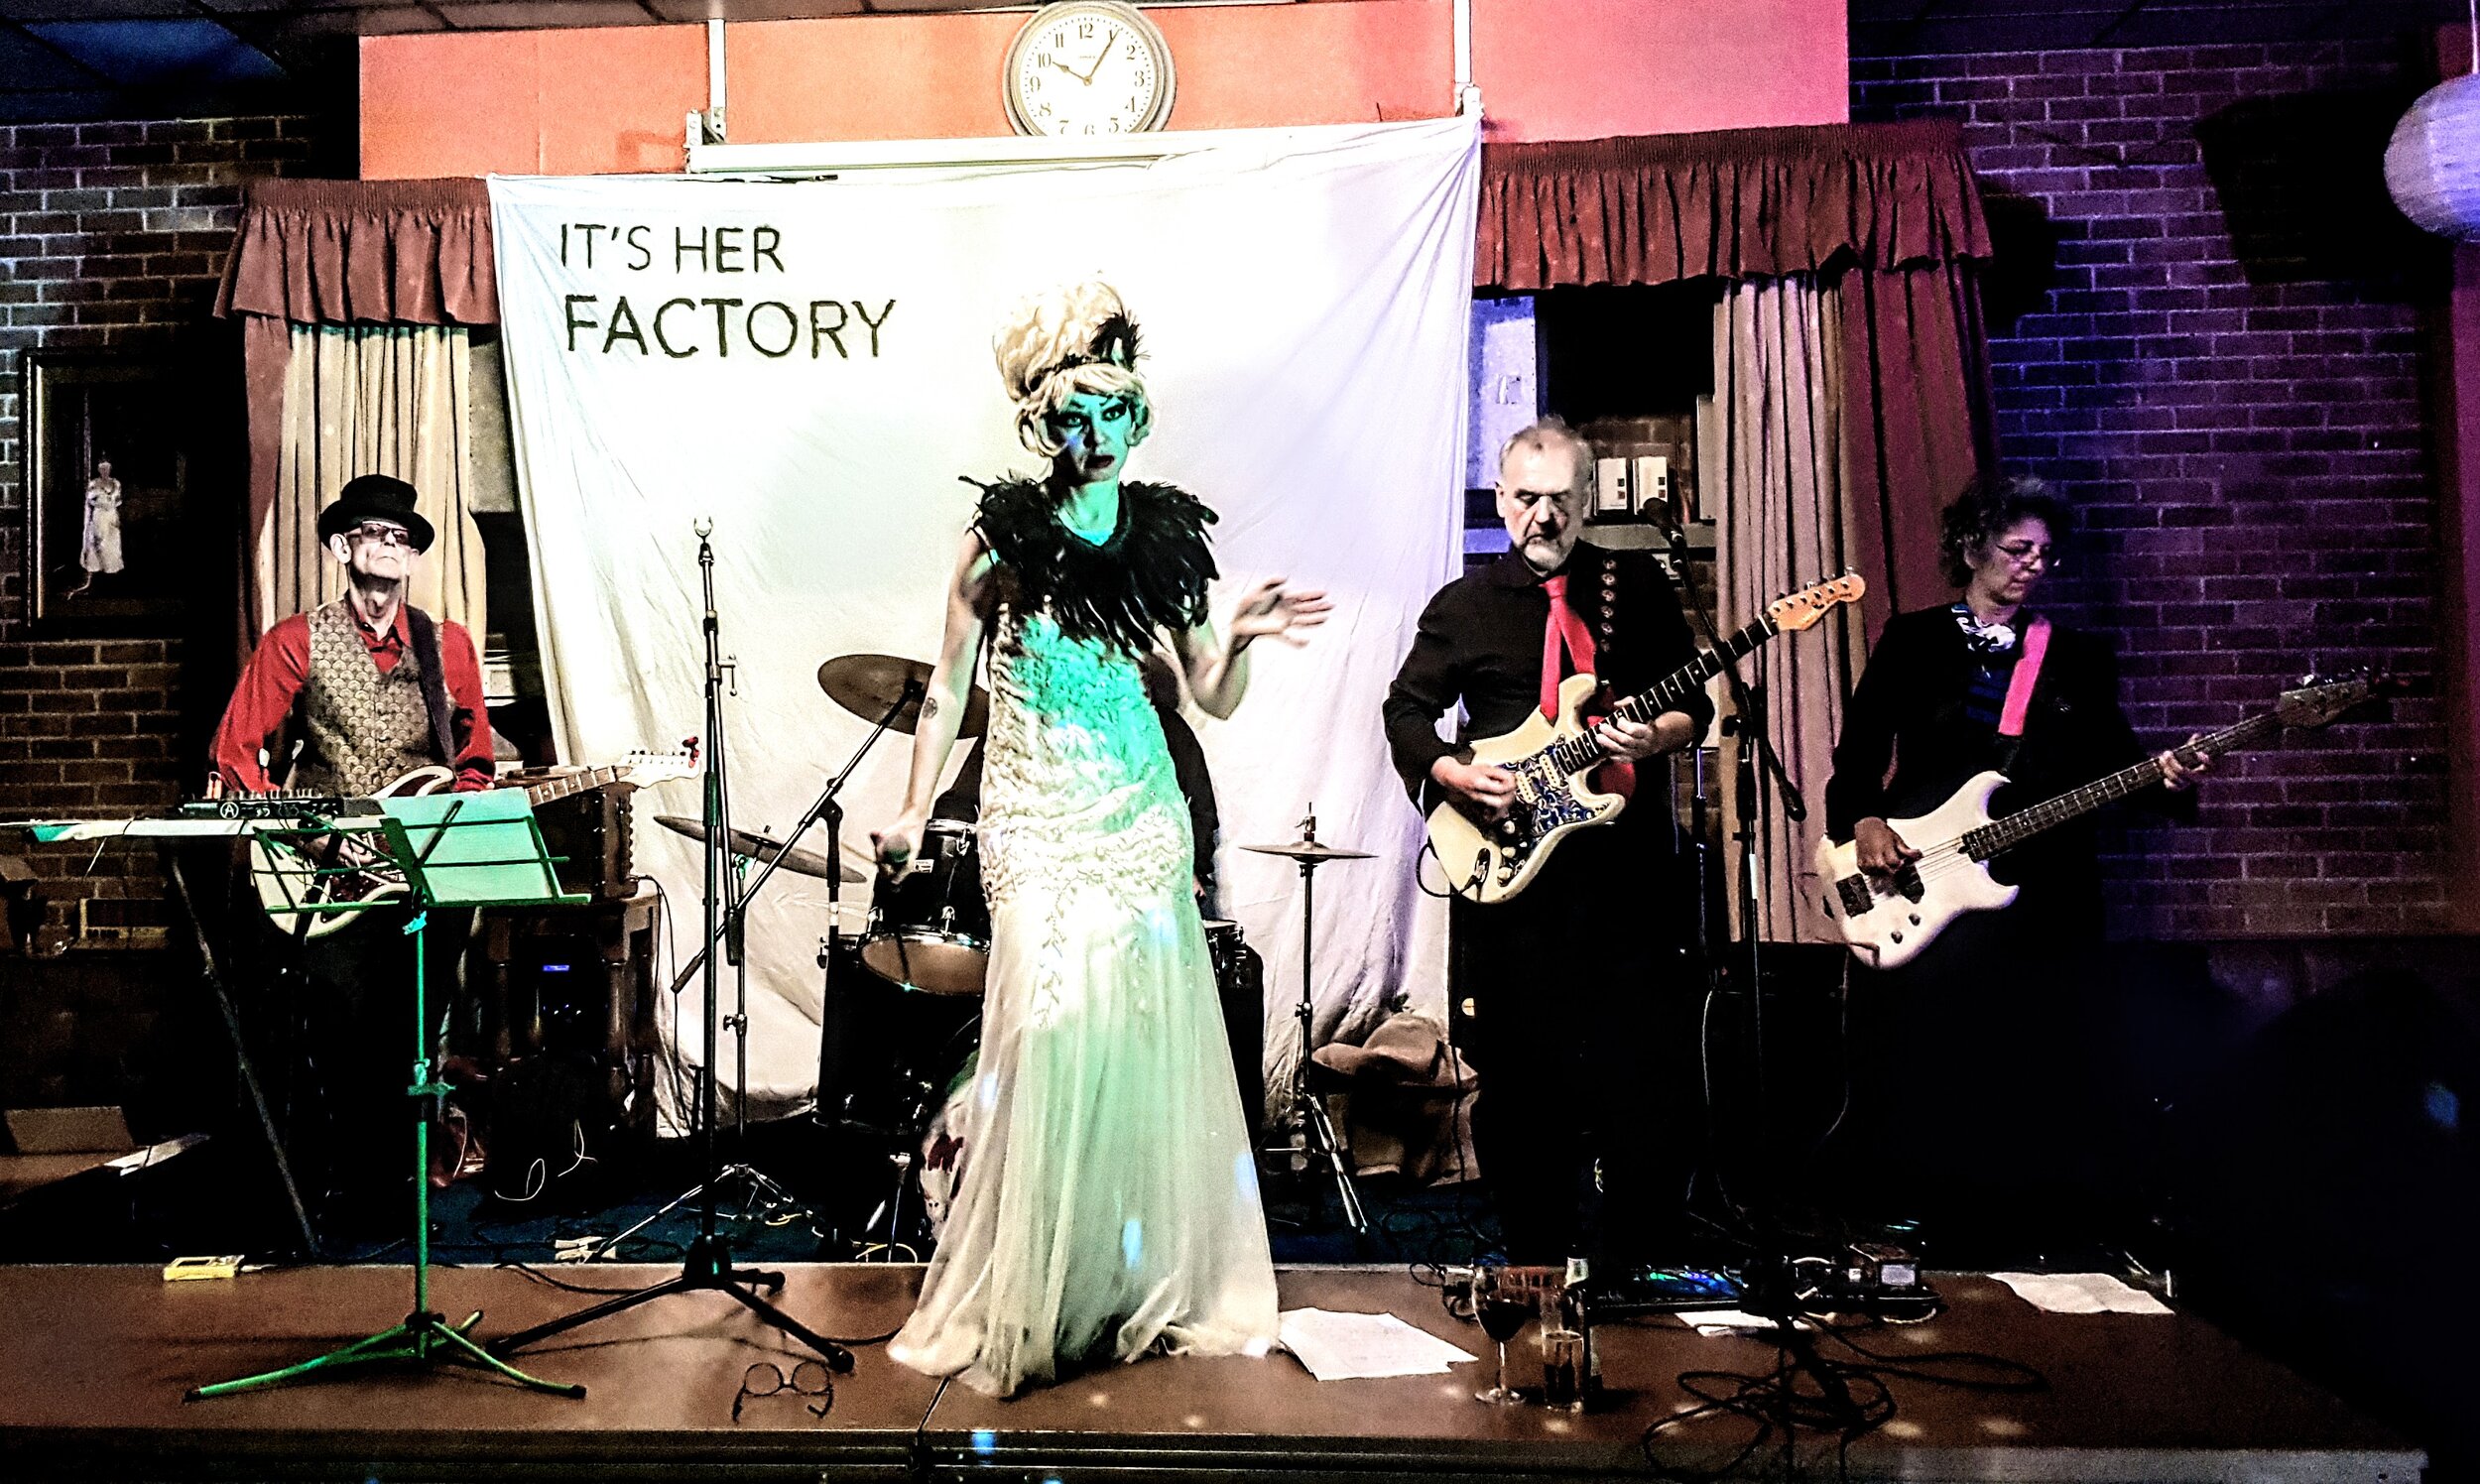 Live at It's Her Factory - Pic: Santa Rubine